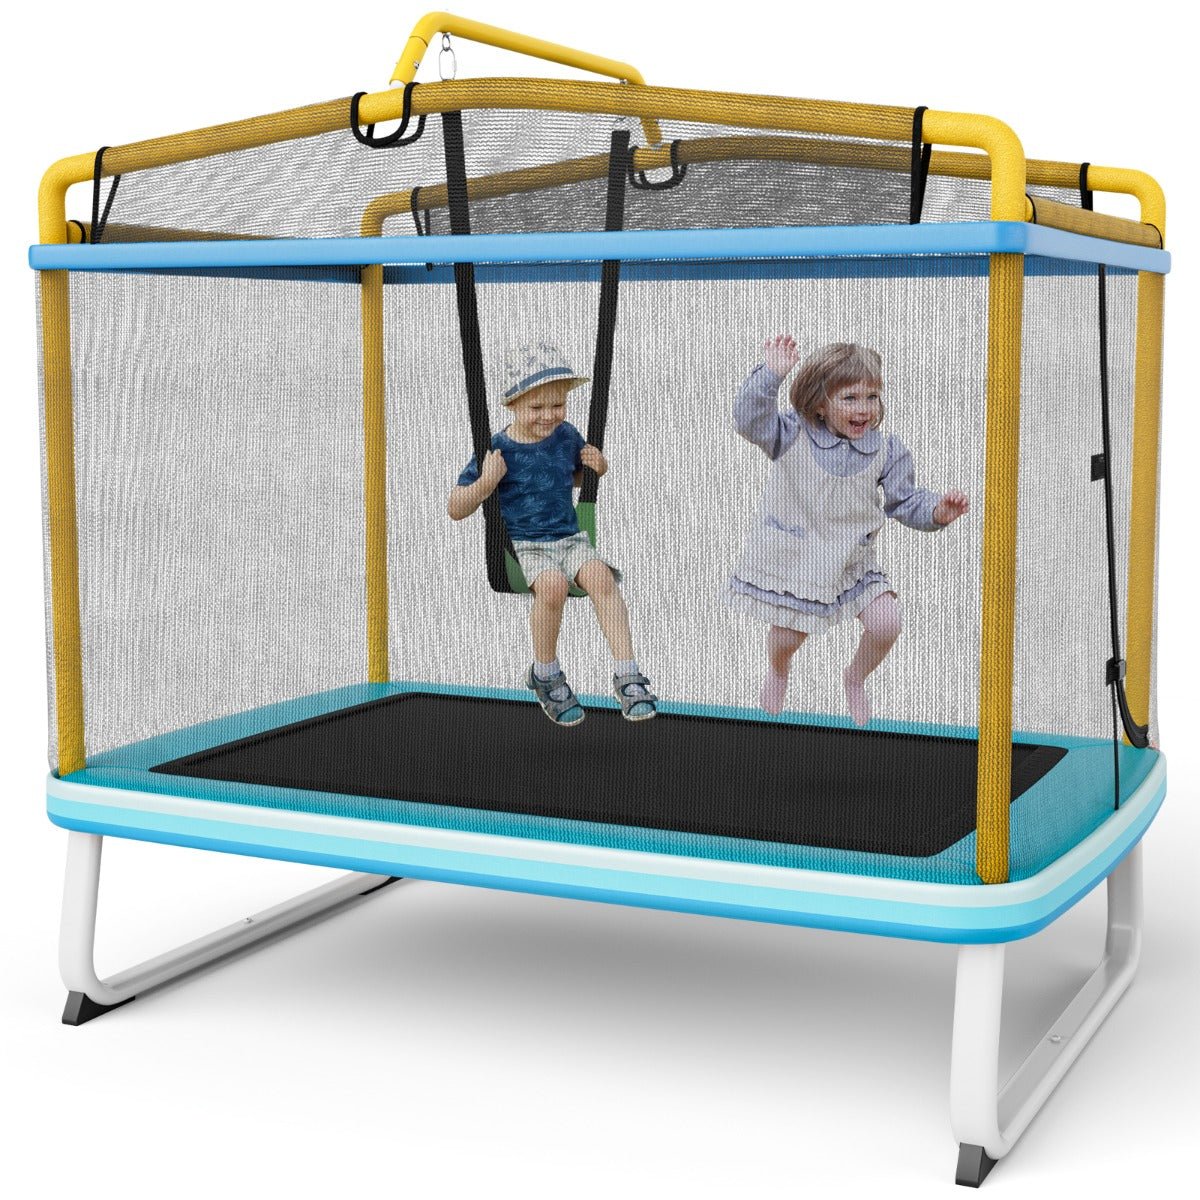 Play and Swing Fusion: 3-in-1 Rectangle Trampoline with Swing & Horizontal Bar Yellow